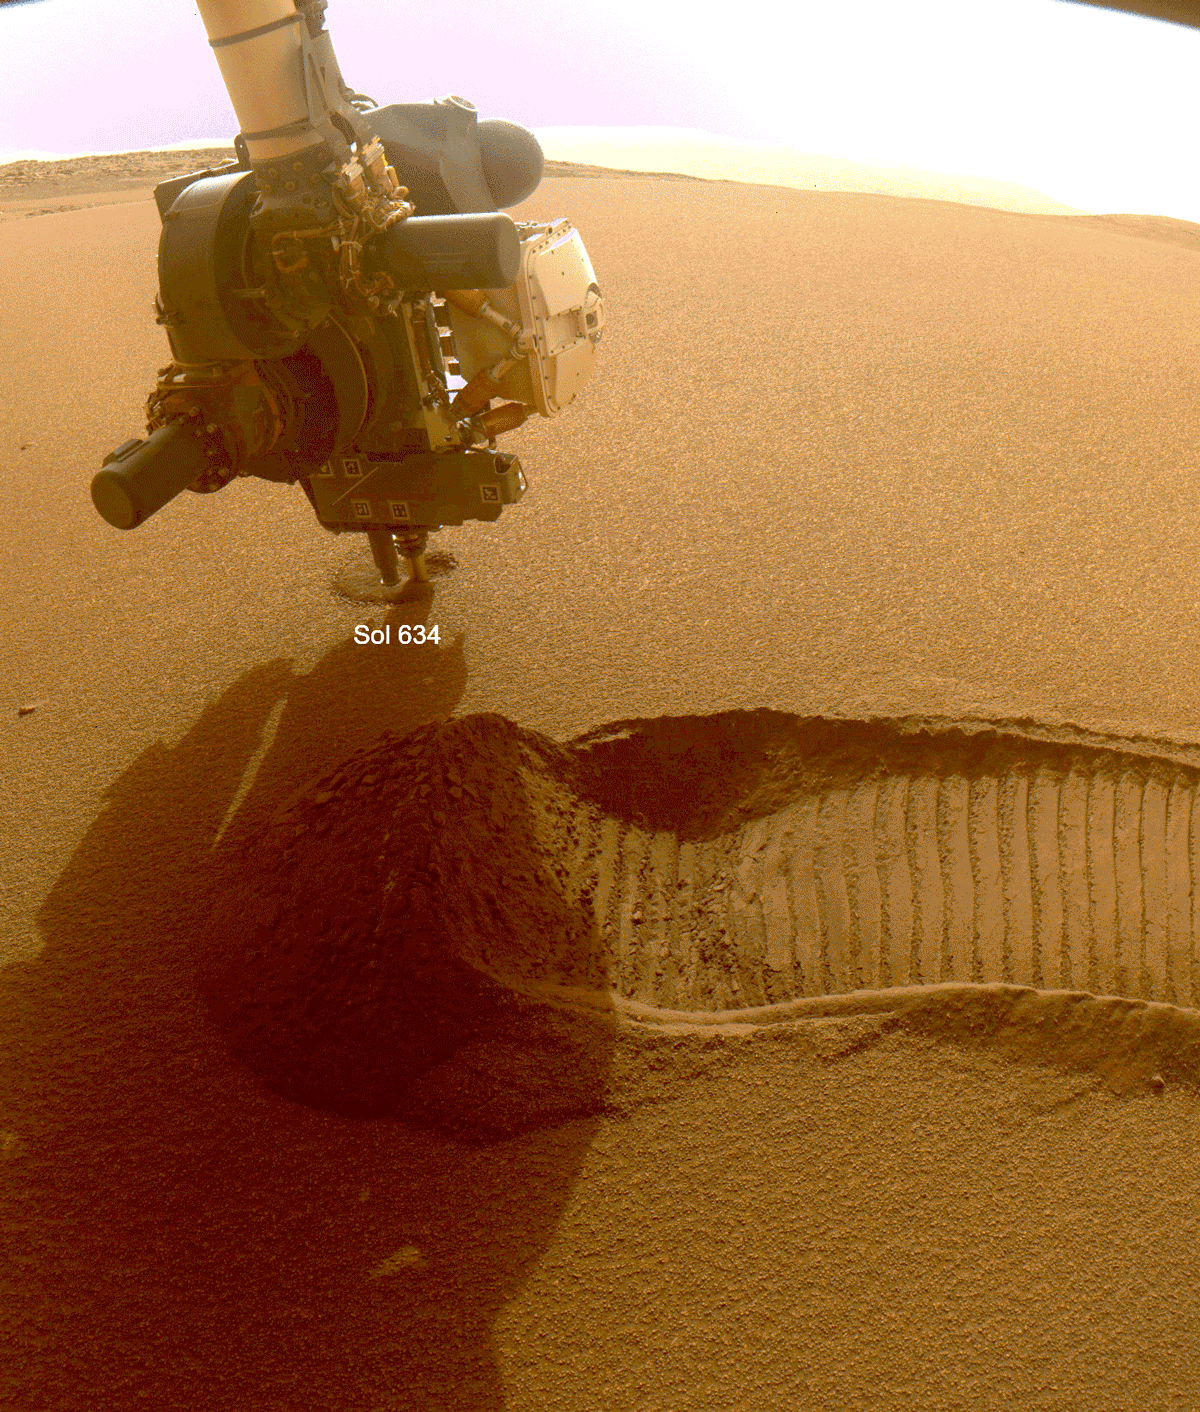 This GIF shows NASA’s Perseverance Mars rover collecting two samples of regolith – broken rock and dust – with a regolith sampling bit on the end of its robotic arm.